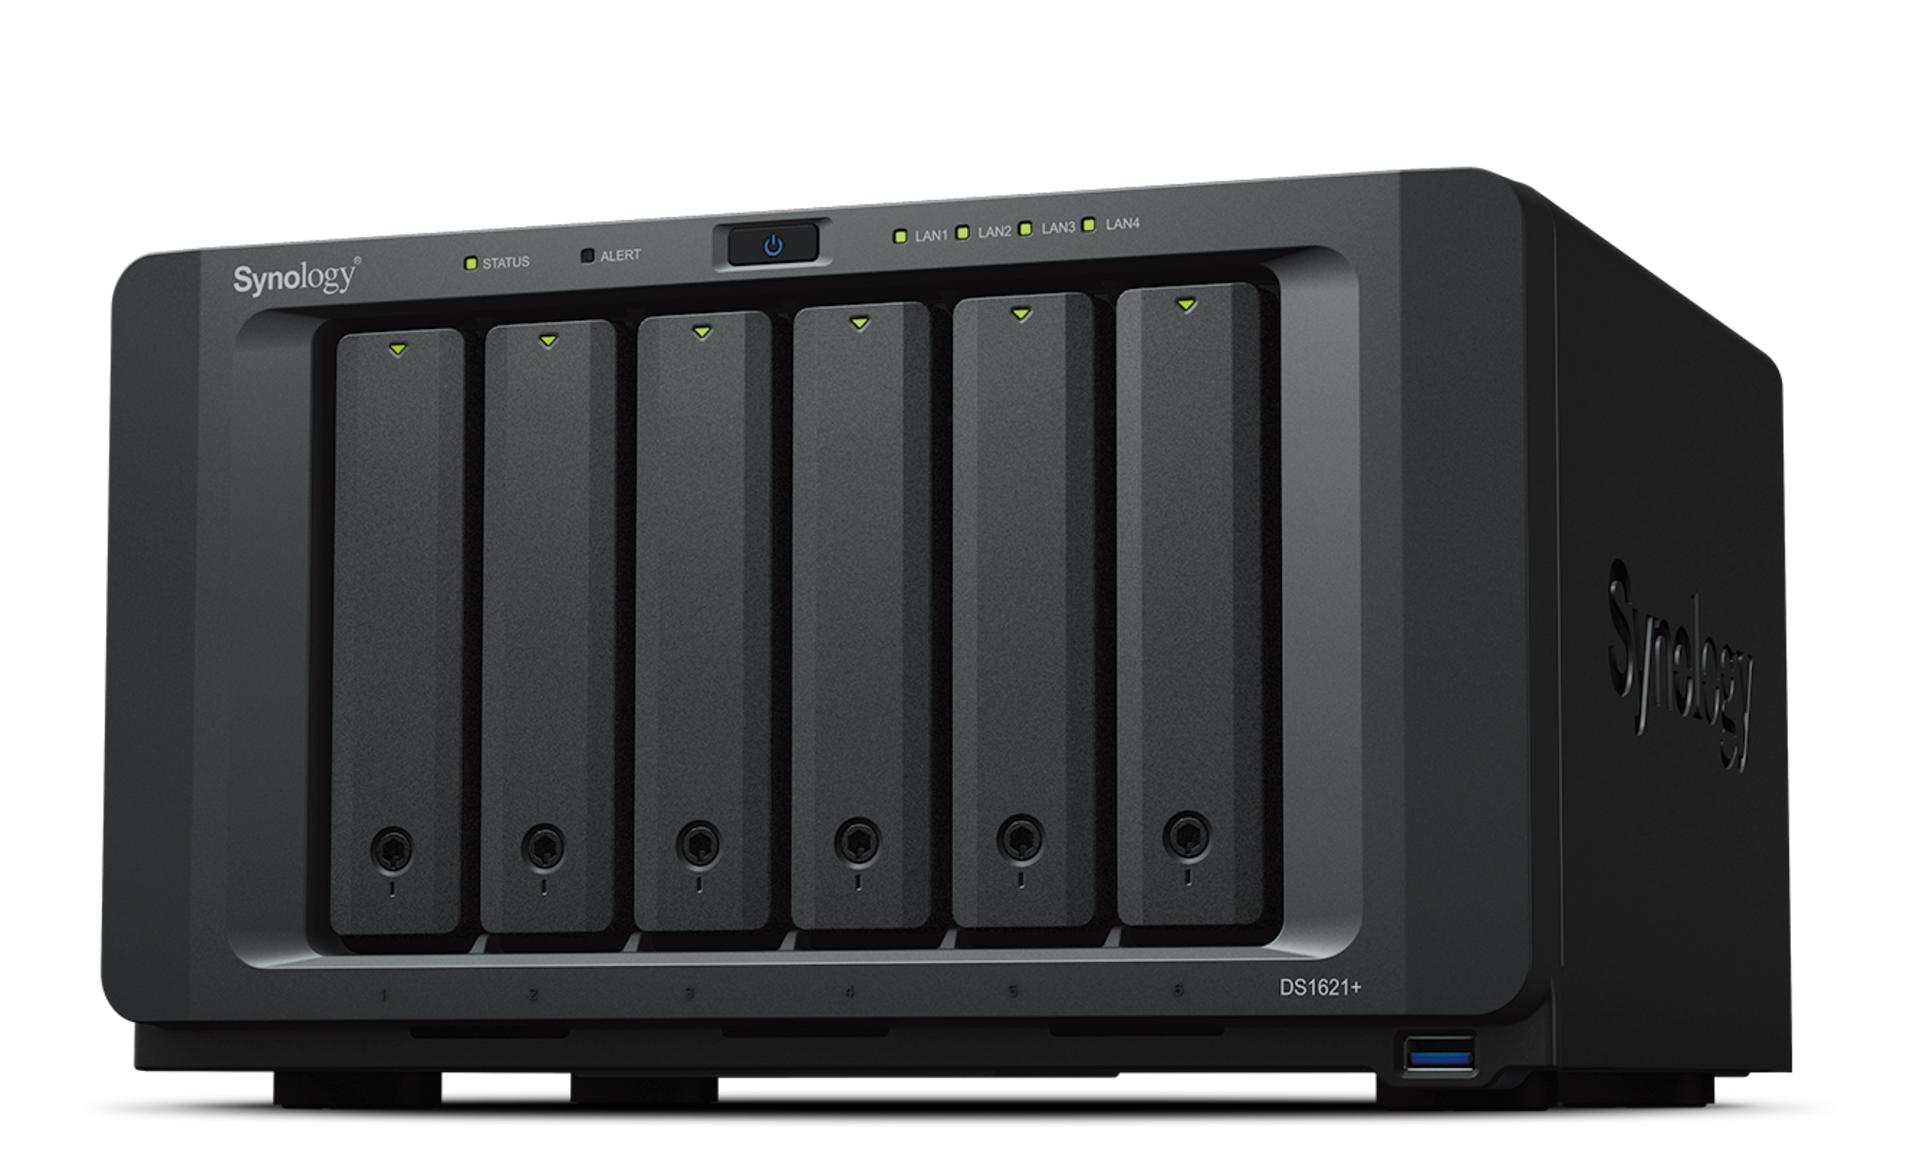 Synology DiskStation DS1621+. - P1. RRP £999.00. Synology DS1621+ is a powerful and compact 6-bay